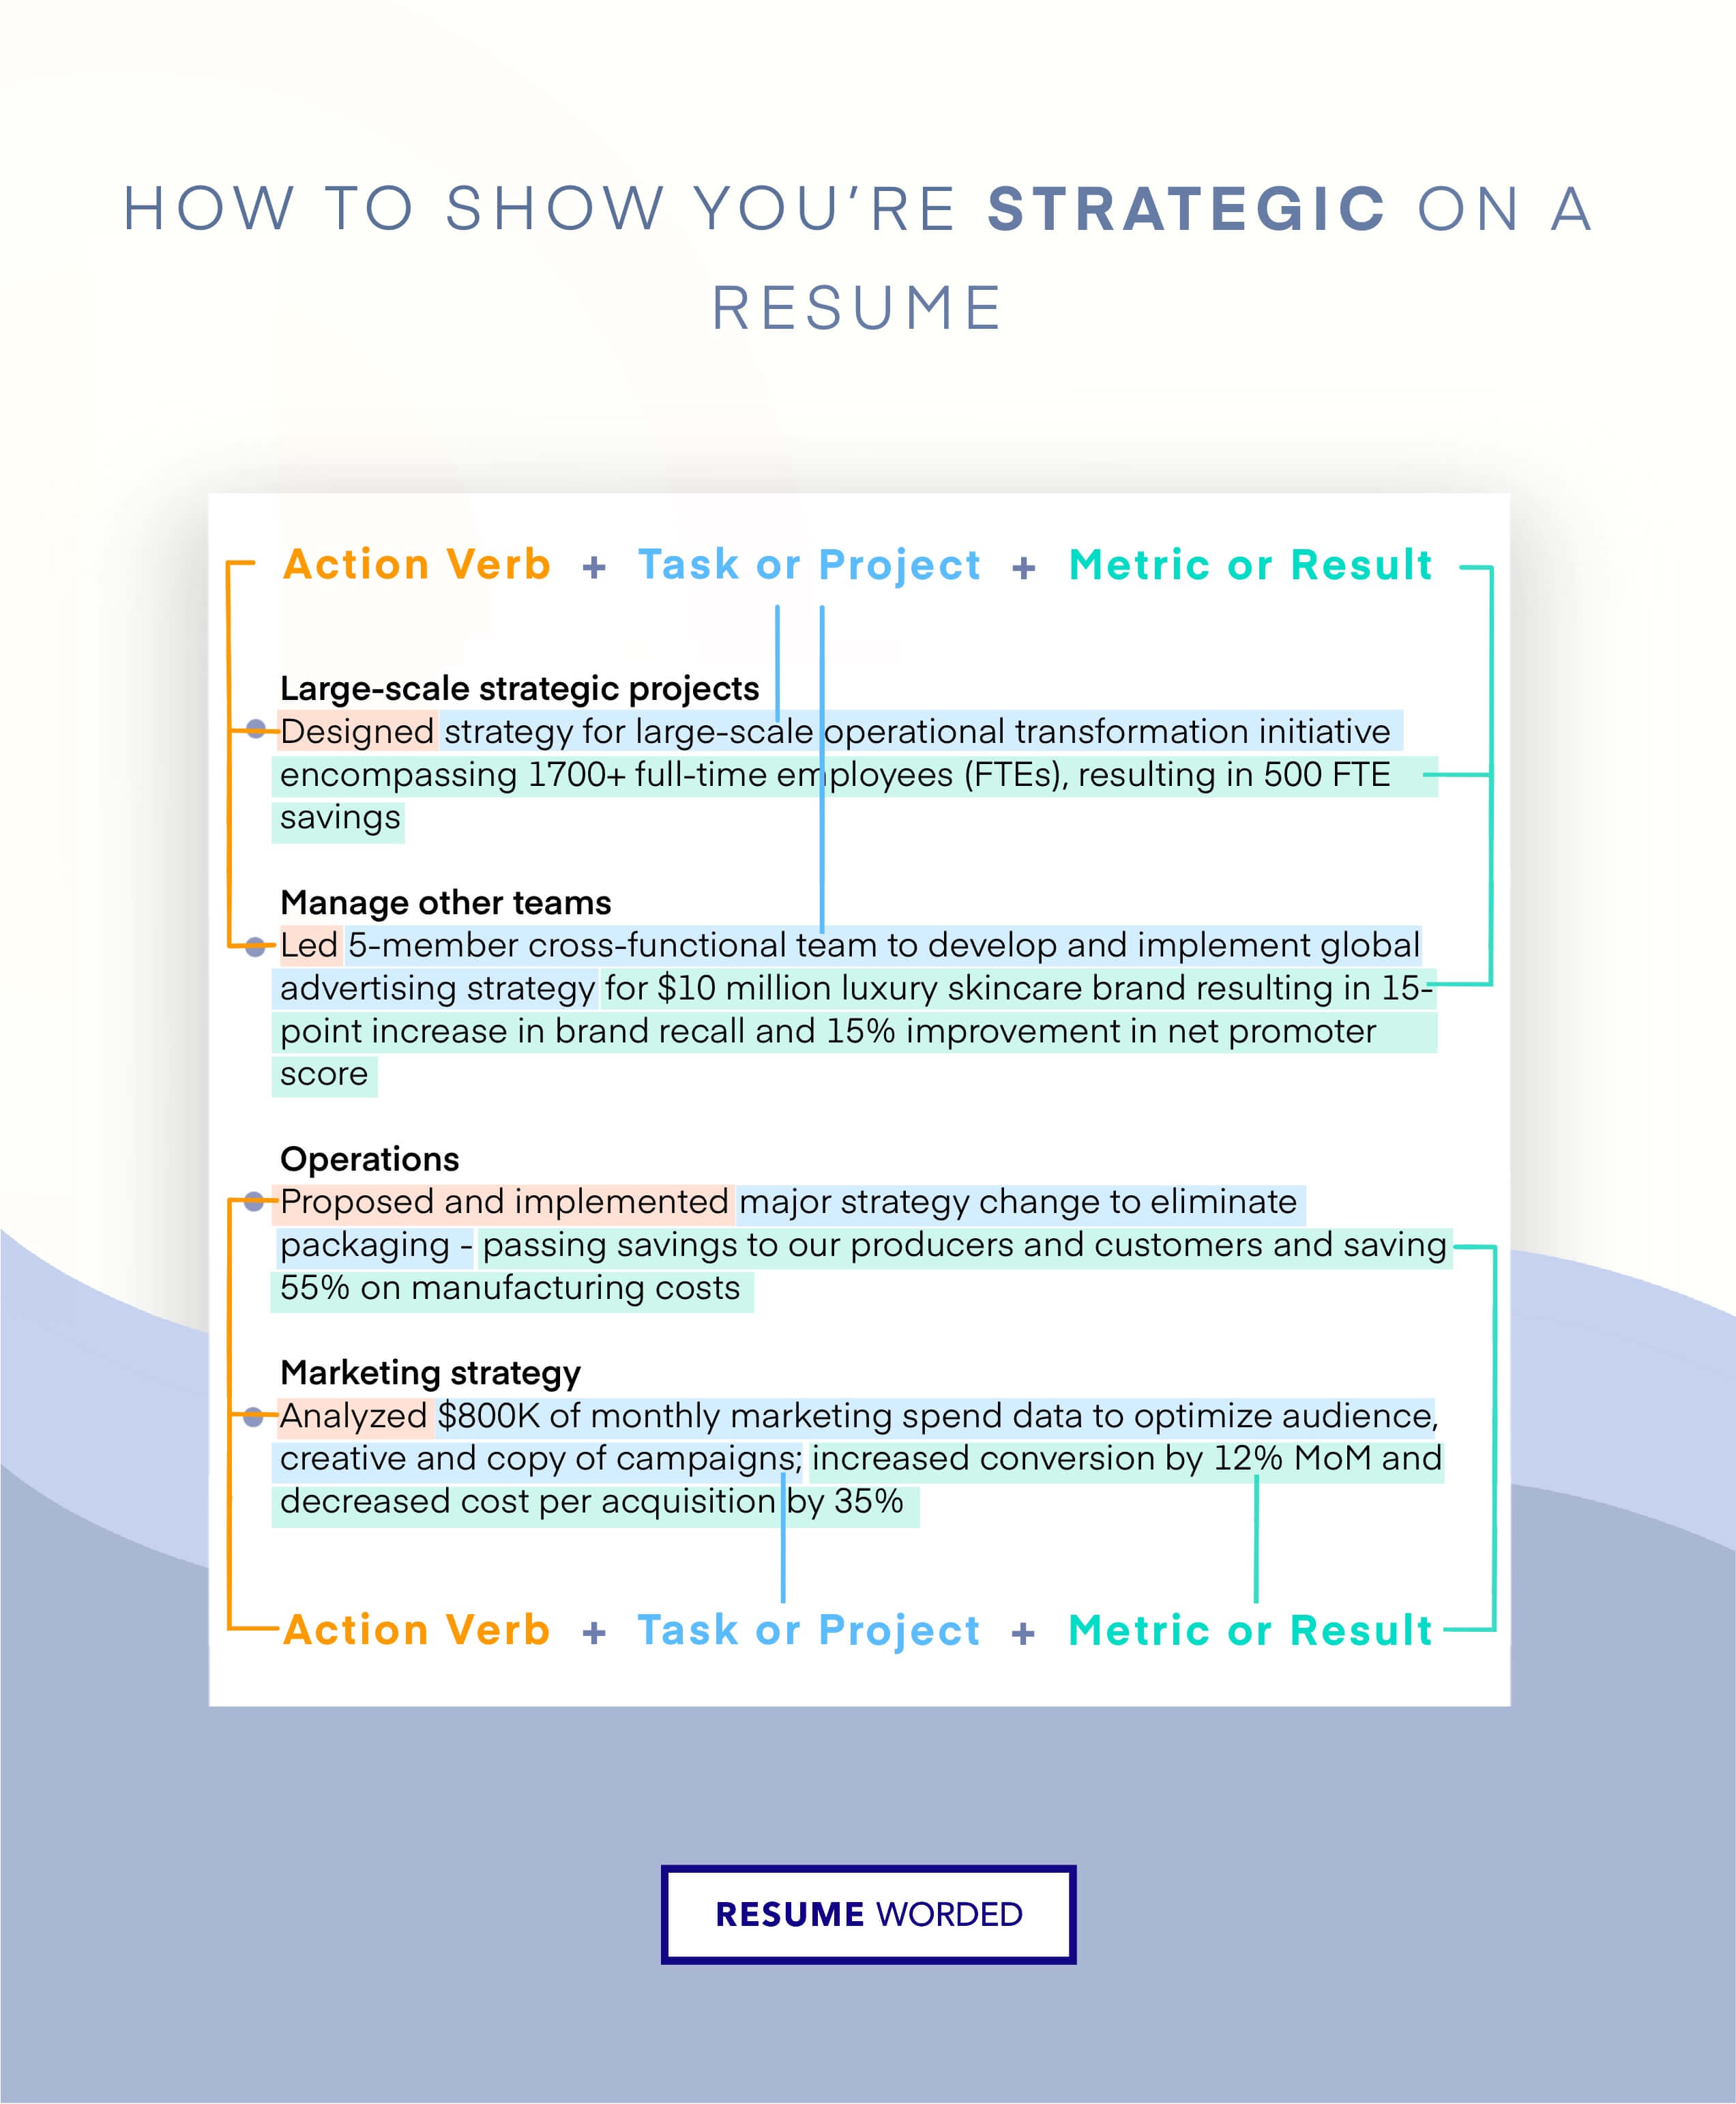 Show your capacity for strategic decision-making - Benefits Specialist CV